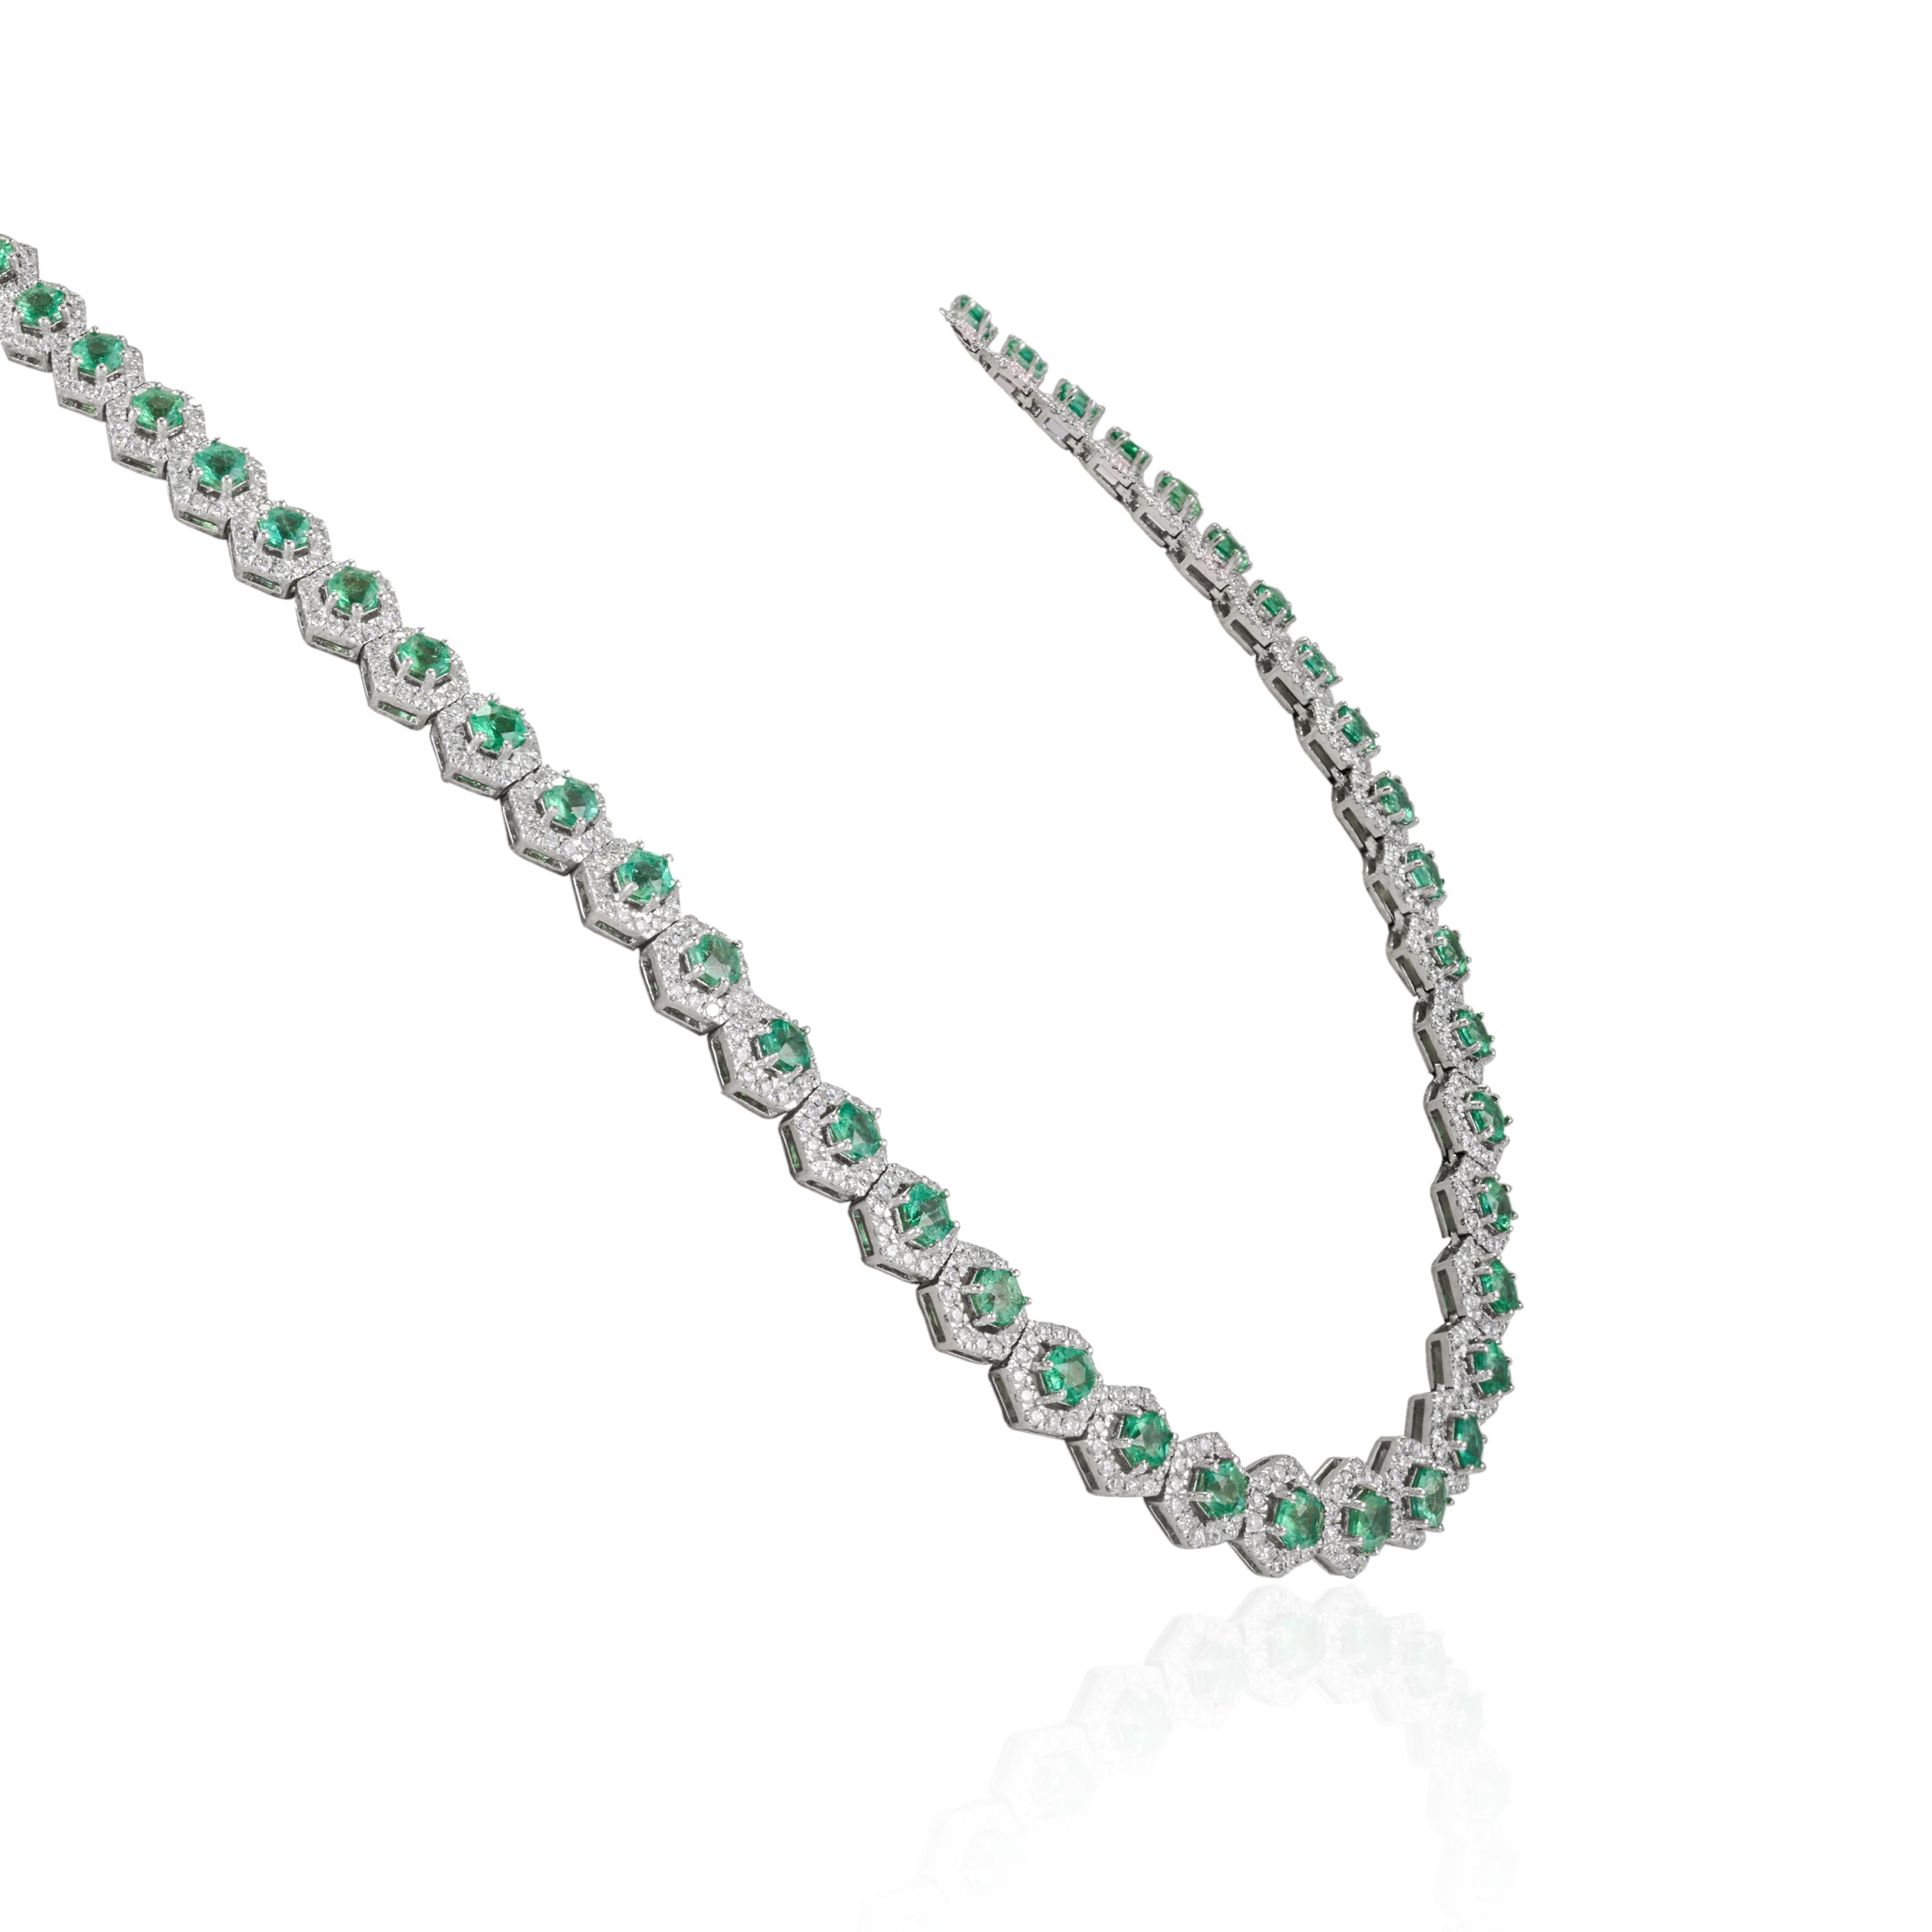 8.36ct Rare Hexagon Emerald and 4.85ct Diamond Tennis Necklace 18k White Gold In New Condition For Sale In Houston, TX